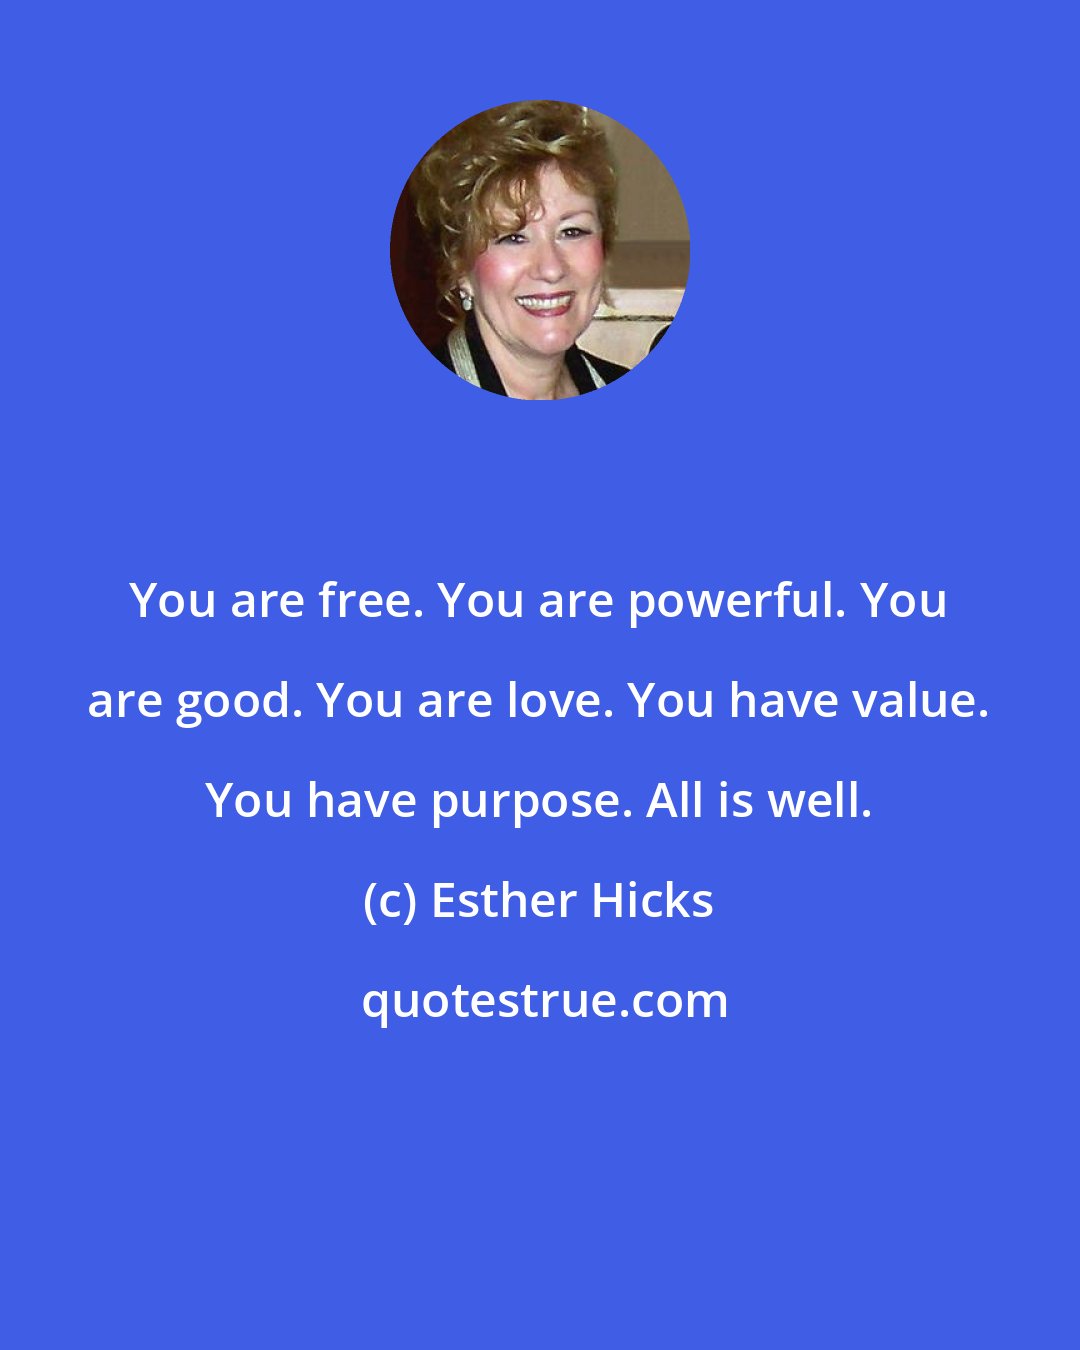 Esther Hicks: You are free. You are powerful. You are good. You are love. You have value. You have purpose. All is well.